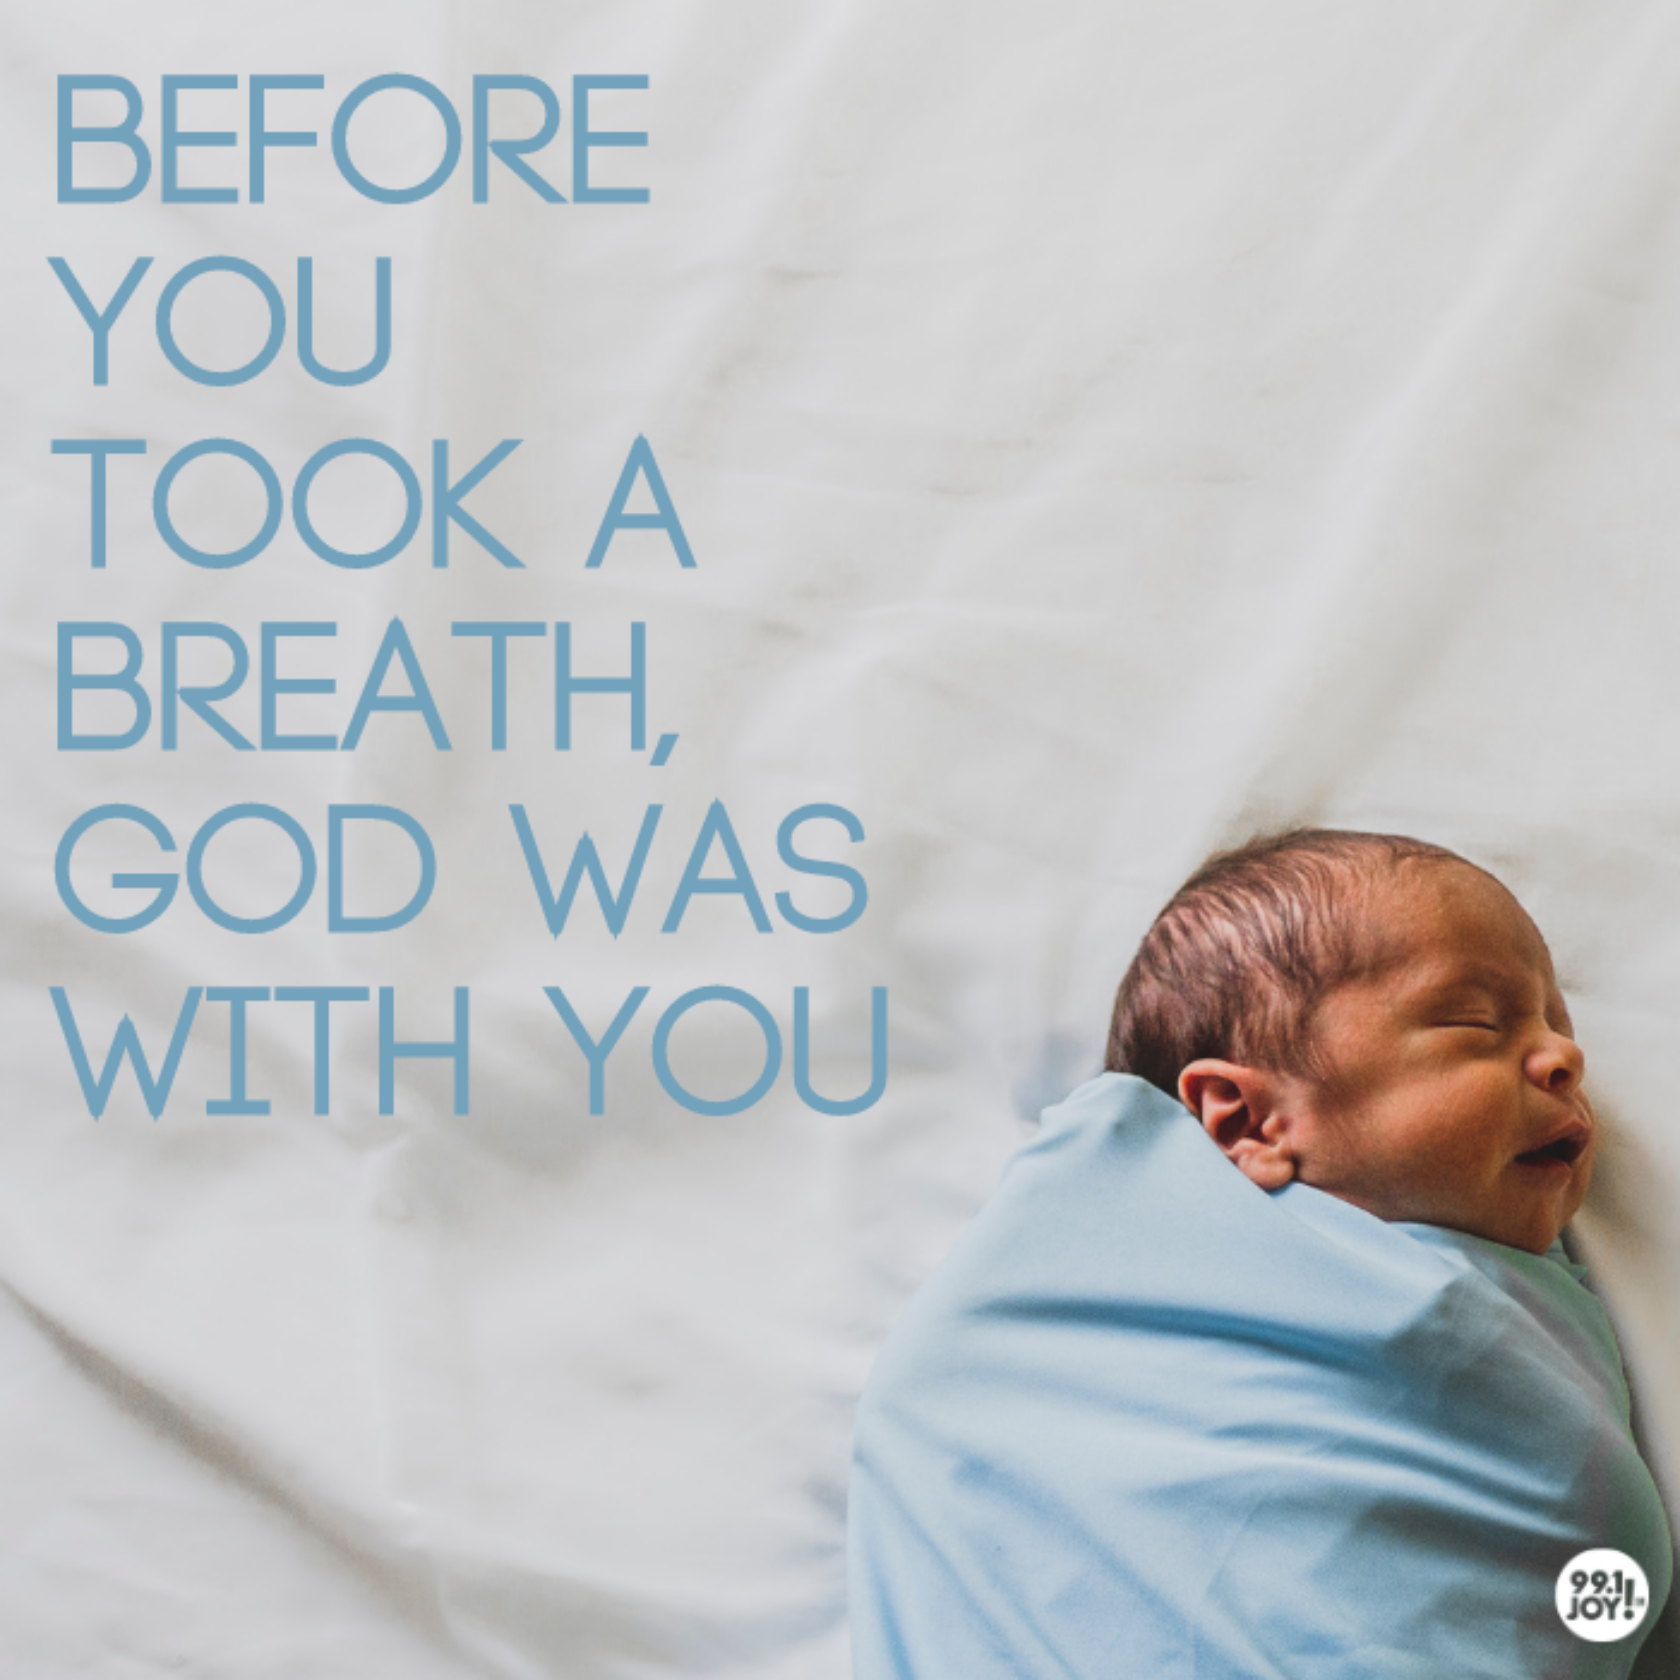 Before You Took A Breath, God Was With You